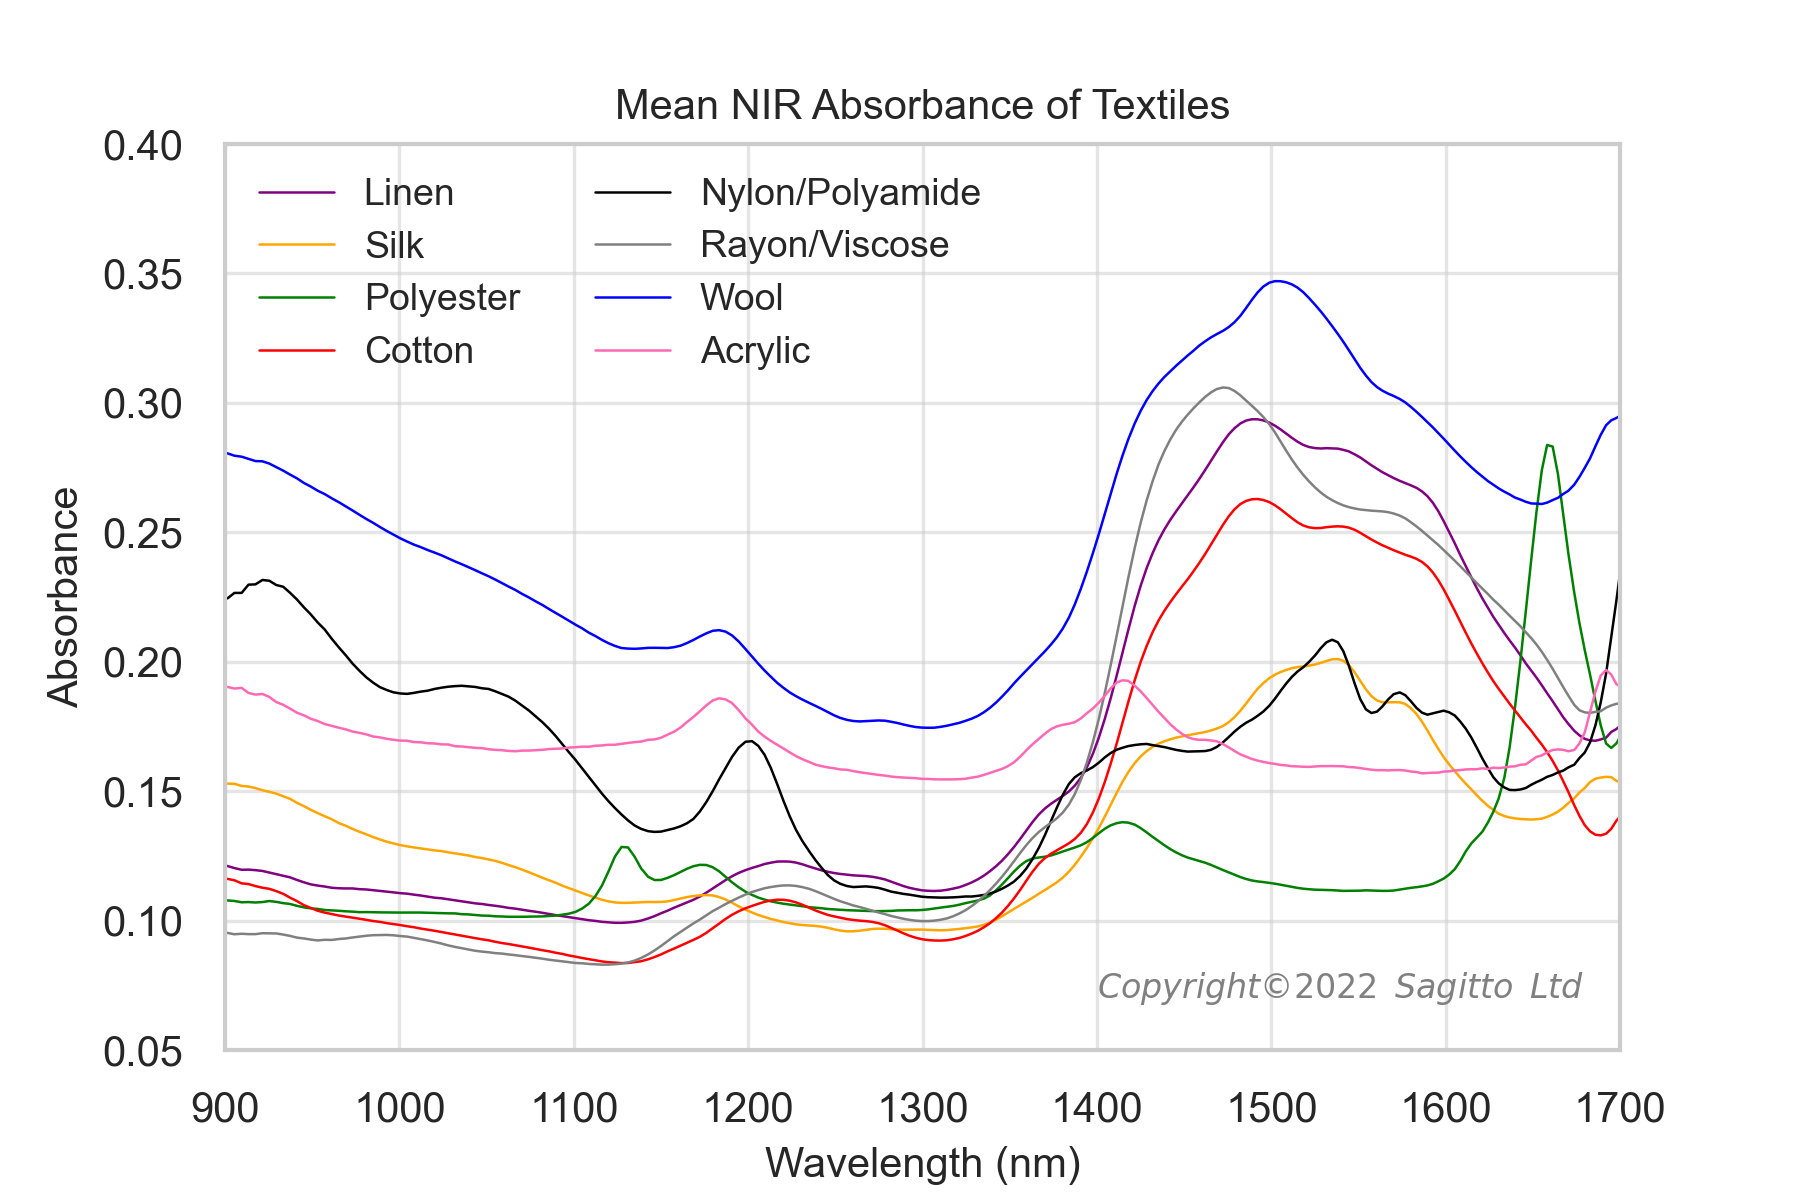 NIR is an excellent technique for identifying the composition of textiles.